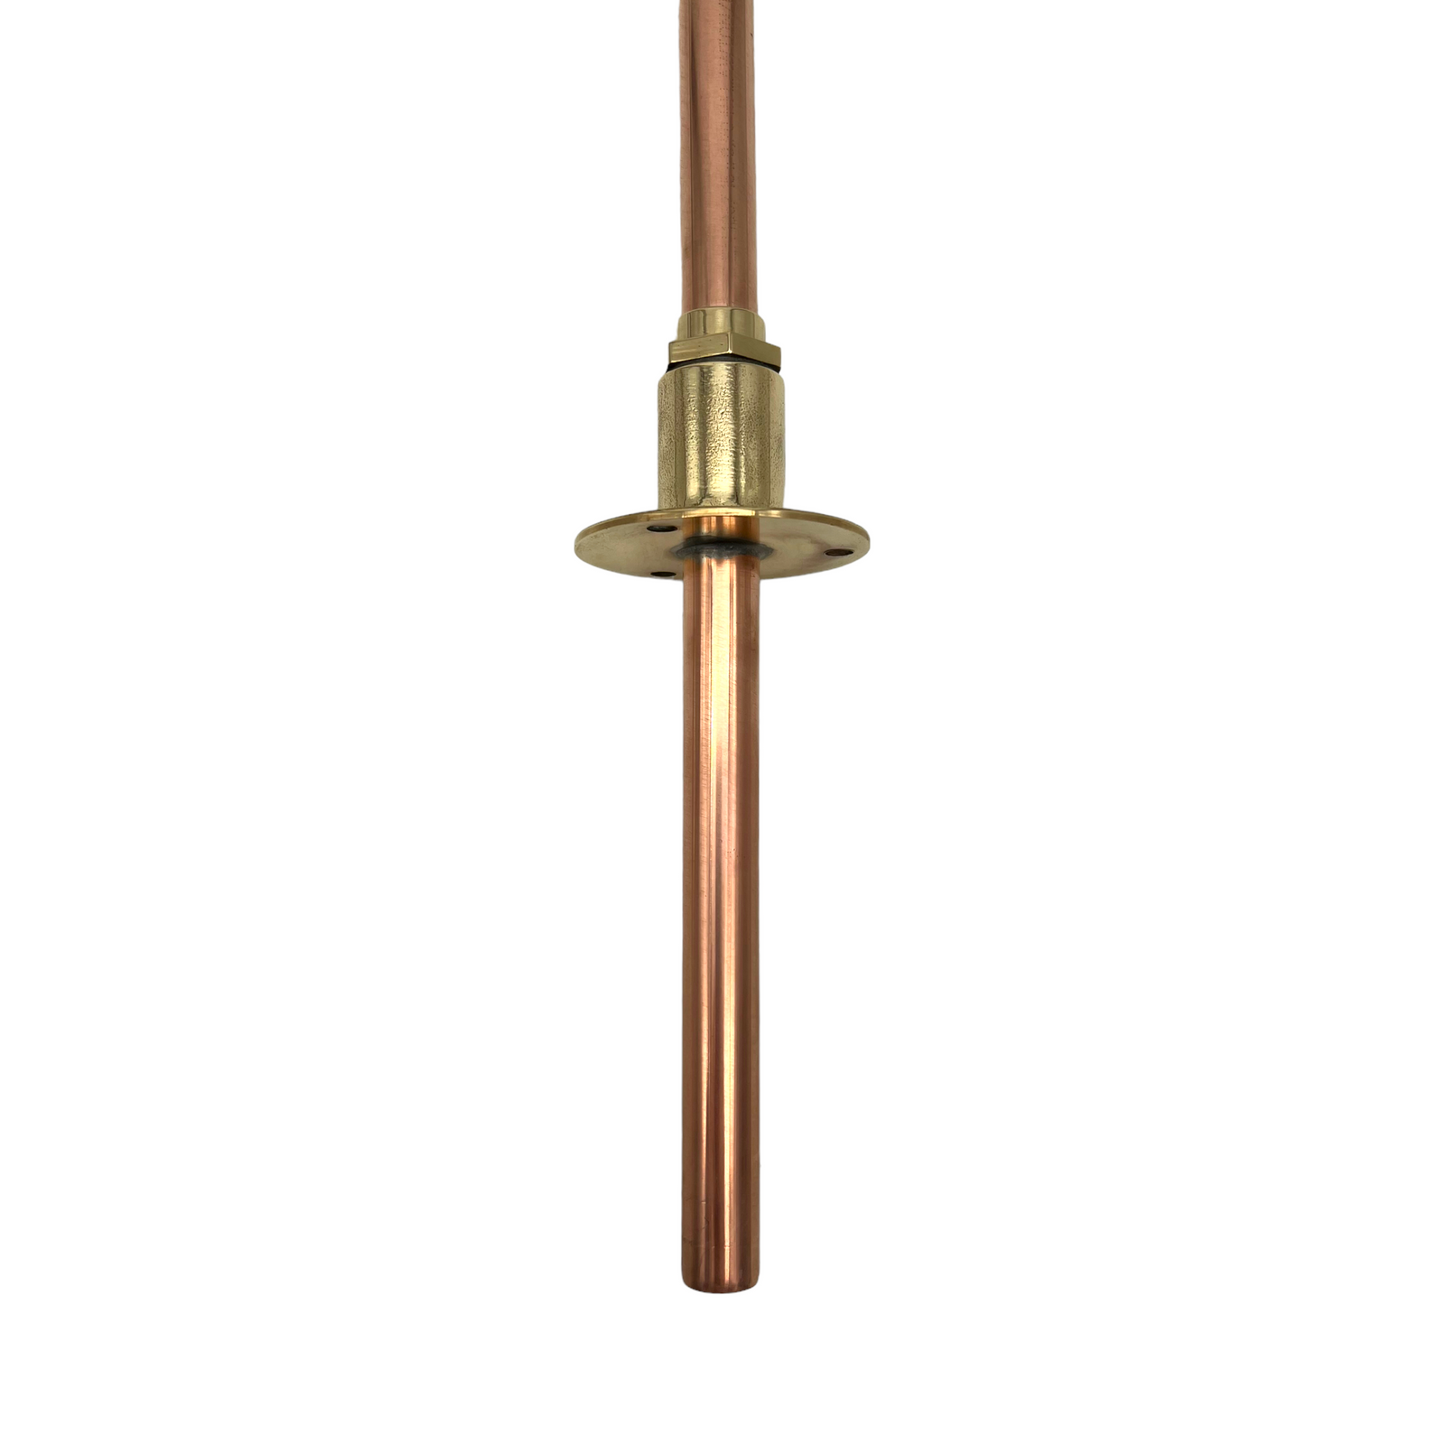 Antique Style Brass and Copper Tap, Belfast Sink Tap, Vintage Style Tap (T34)